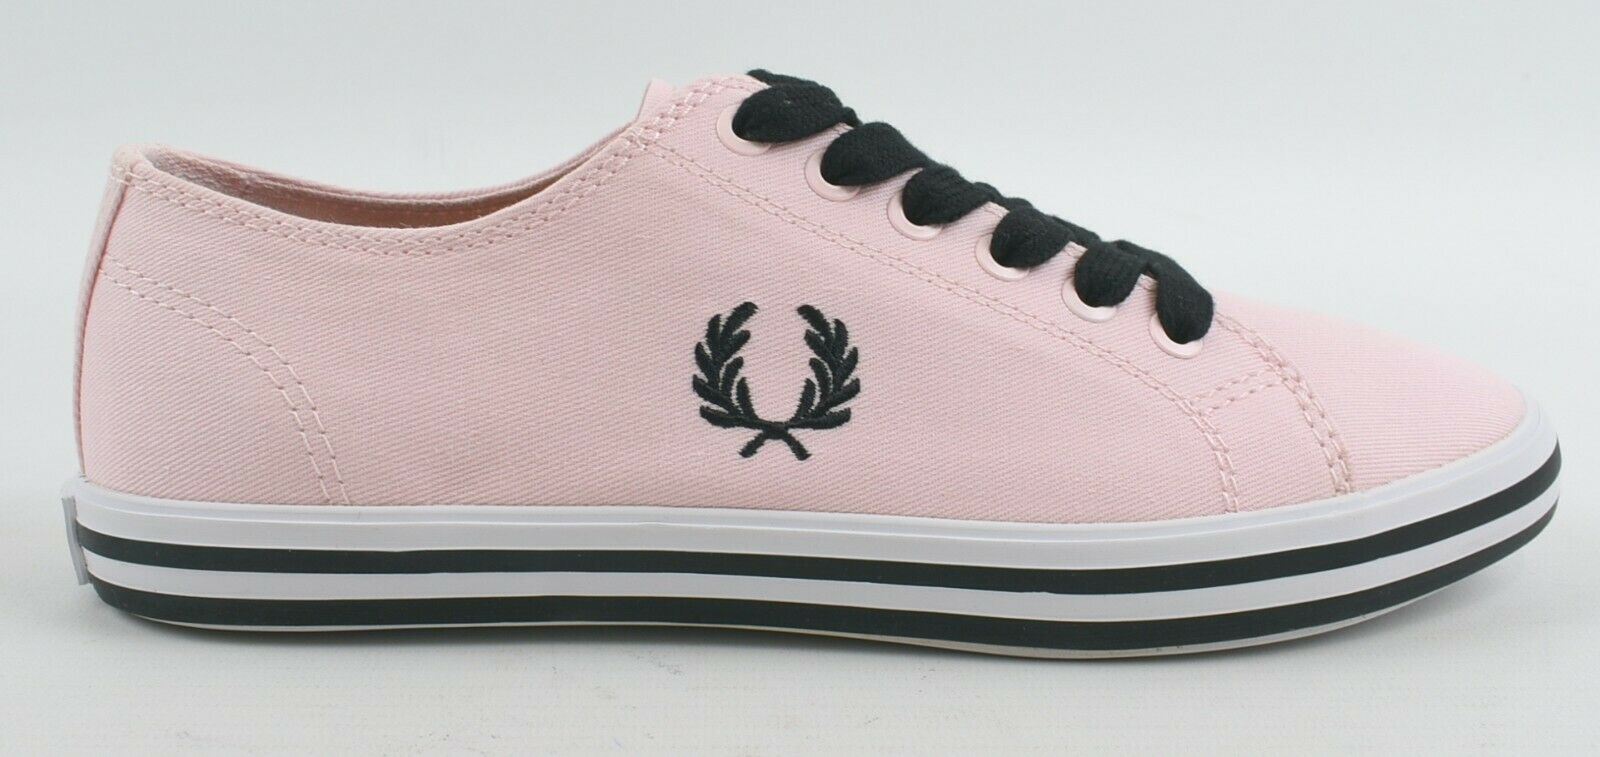 FRED PERRY Women's KINGSTON TWILL Trainers, Iced Pink, size UK 5 /EU 38